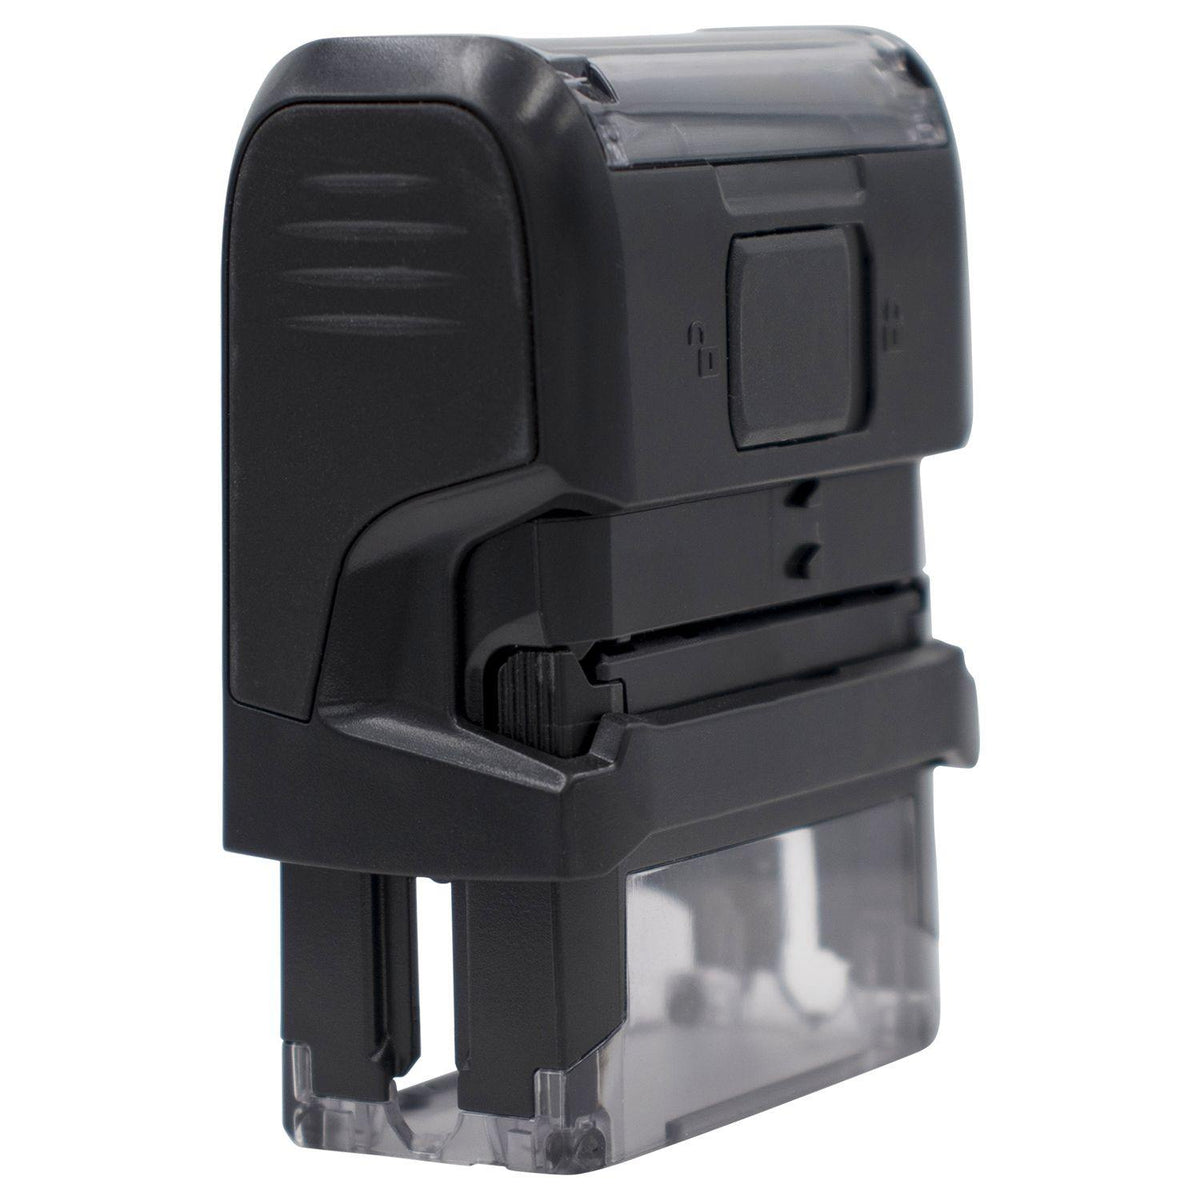 Large Self-Inking Bold Covid-19 Stamp Back View